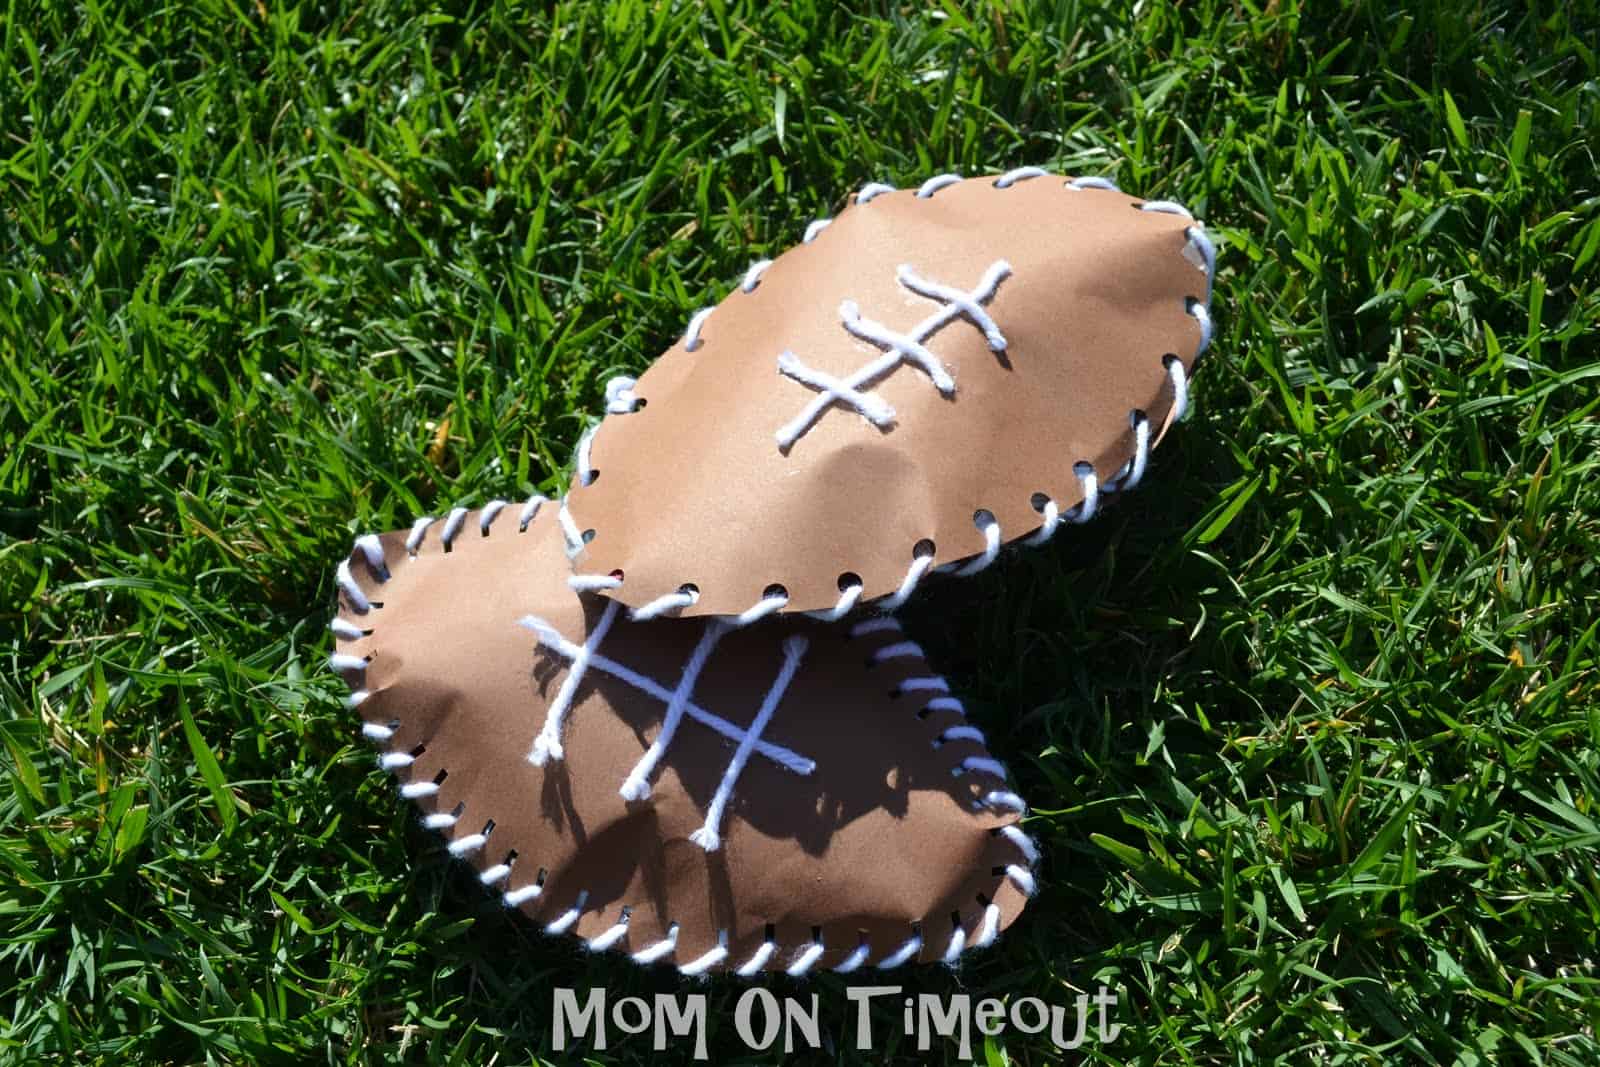 Puffy laced paper footballs